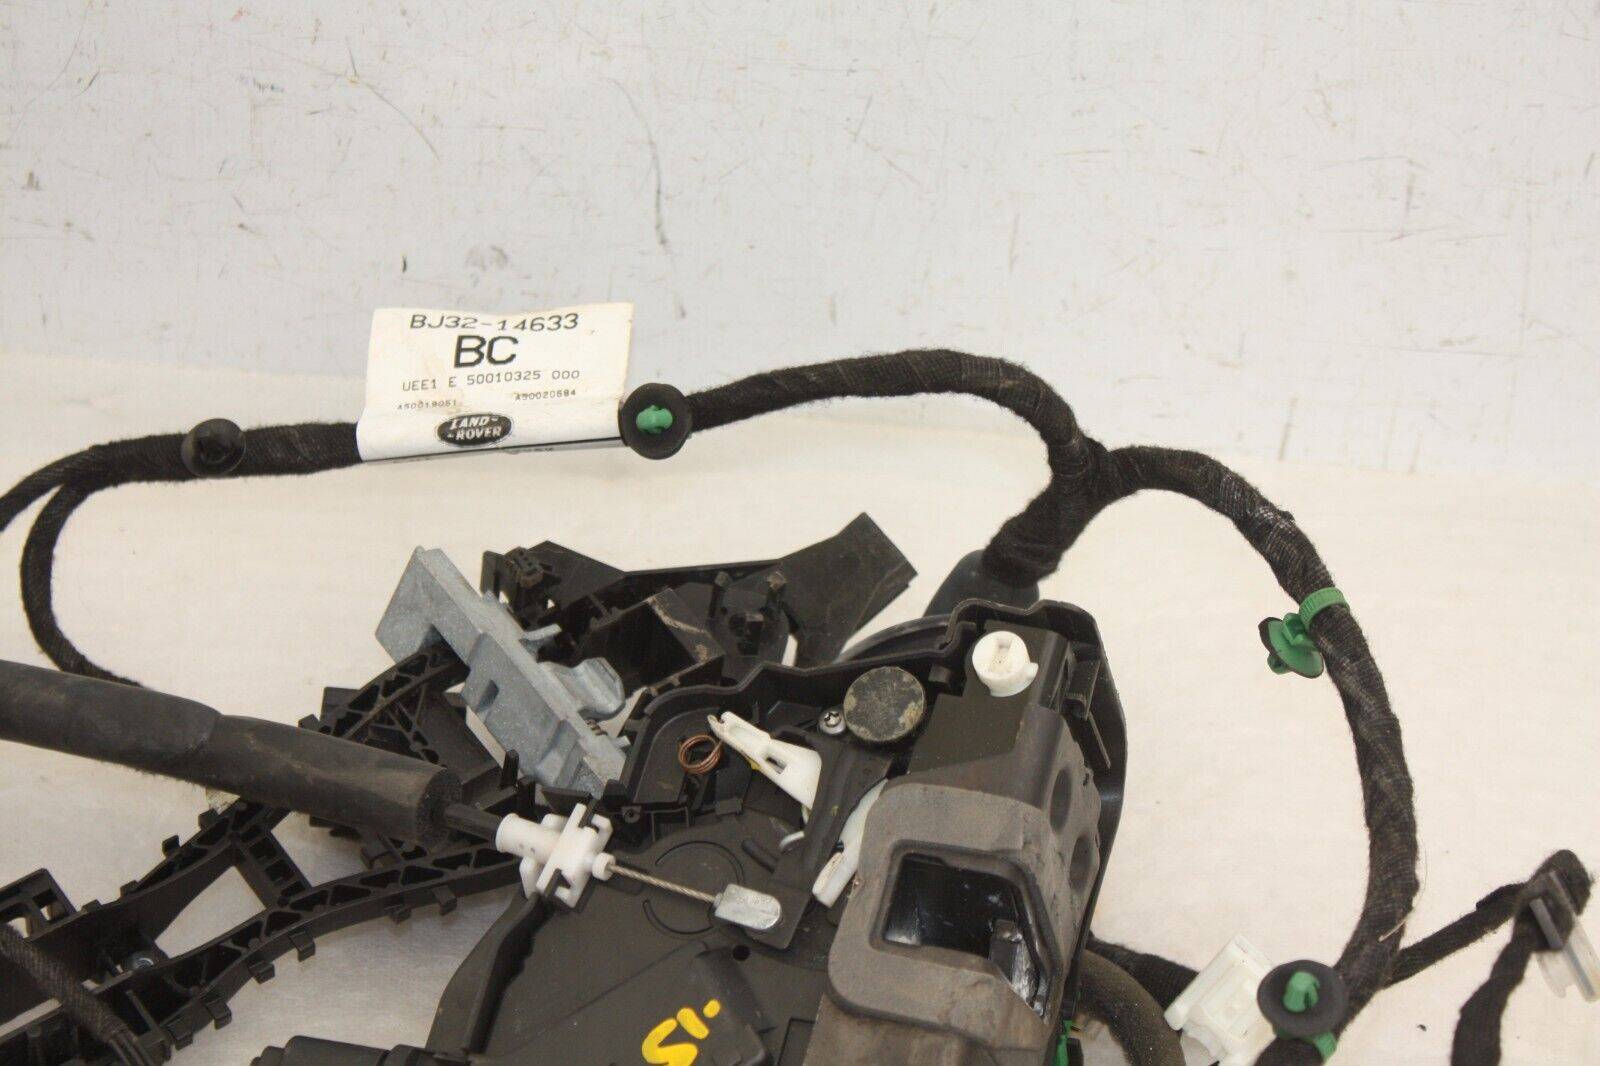 Range-Rover-Evoque-L538-Rear-Right-Door-Wiring-Loom-With-Motor-BJ32-14633-BC-176345734719-6